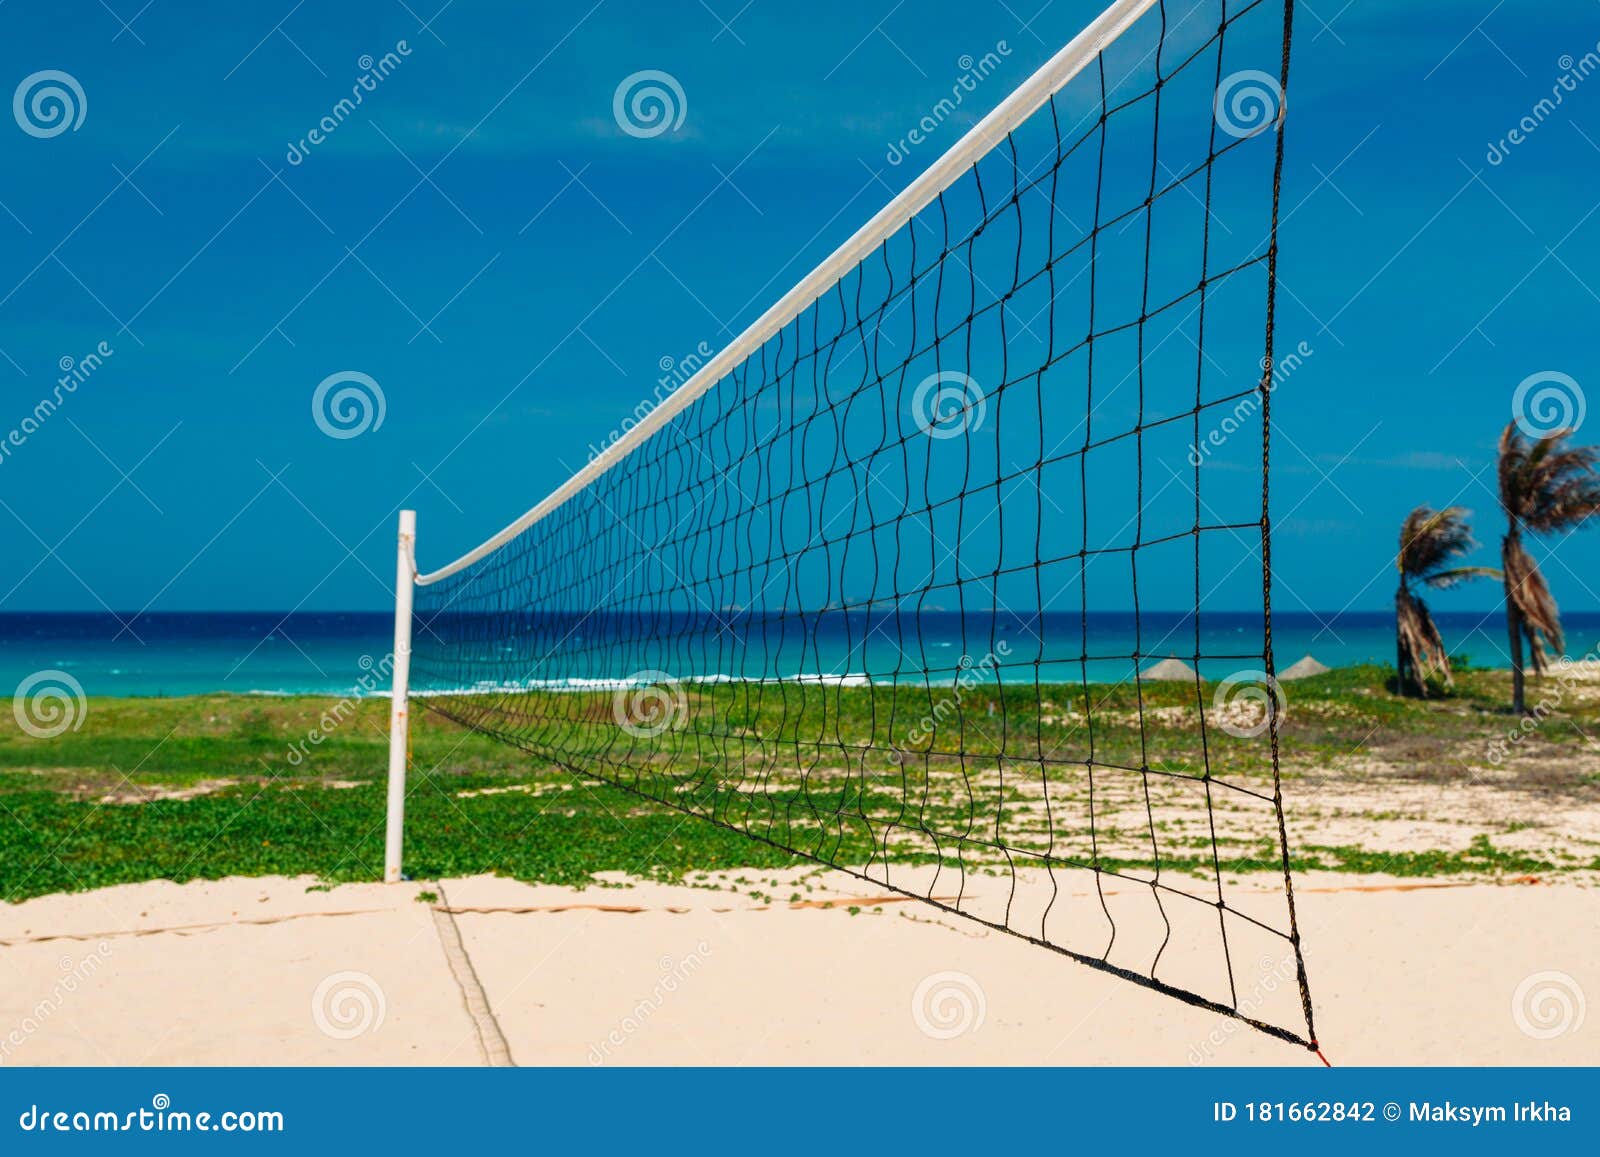 Volleyball Court On The Sandy Shore Near The Sea. No One ...